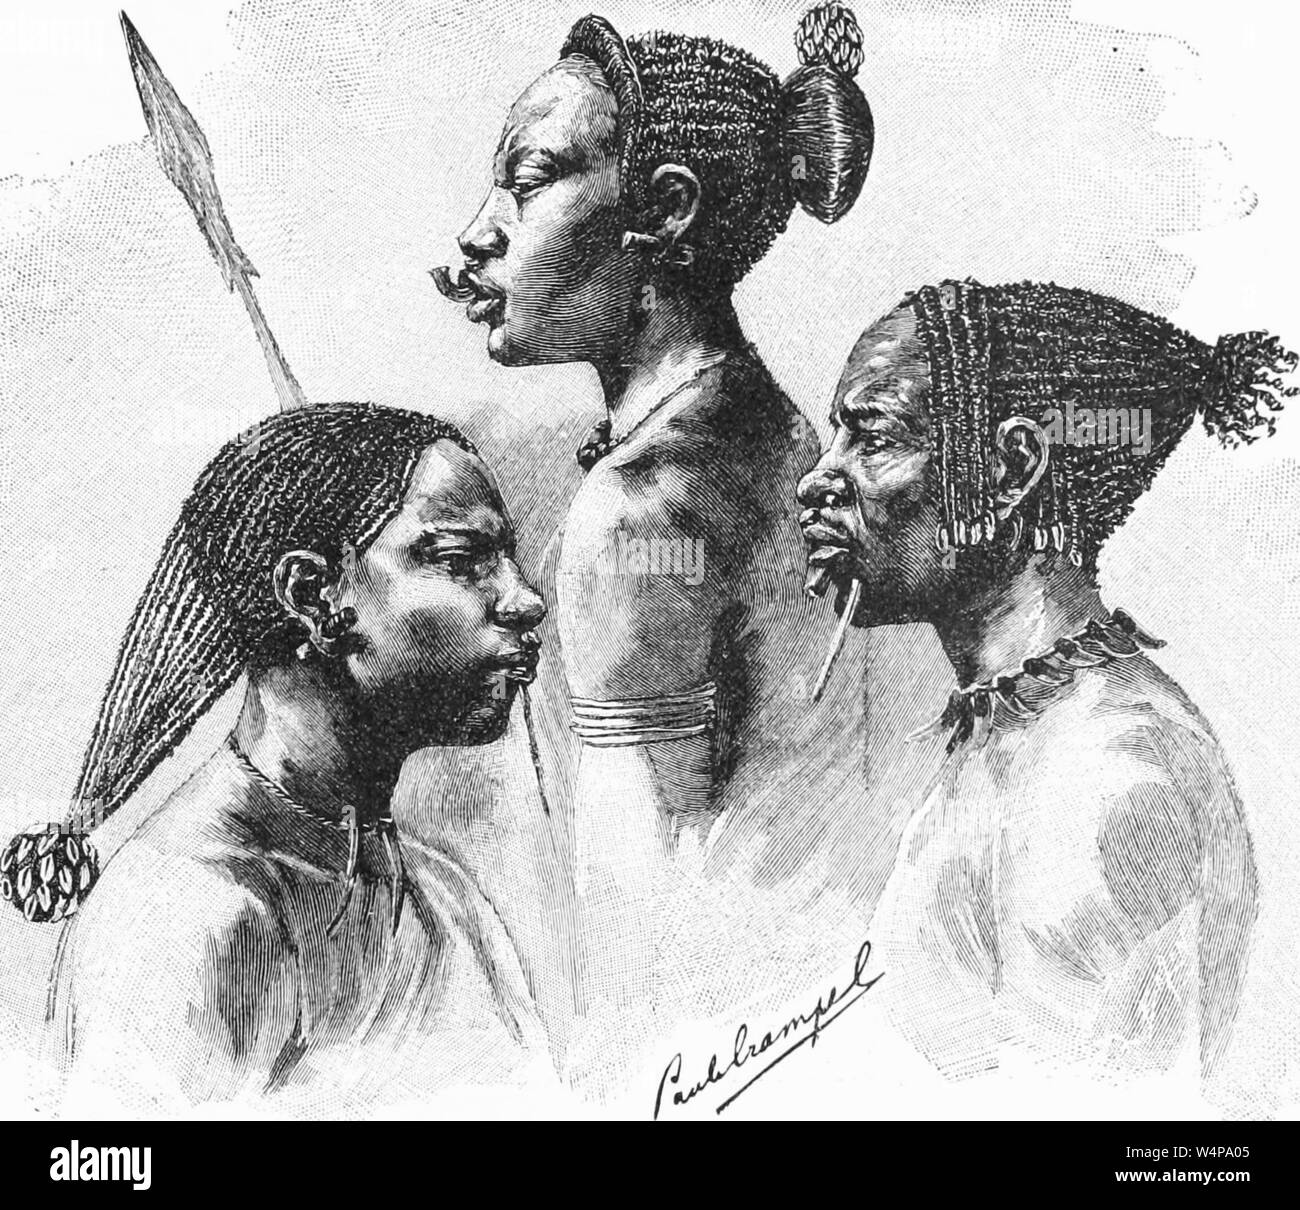 Engraved drawing of the Langonassi Sudanese tribe people, from the book 'Ridpath's Universal history' by John Clark Ridpath, 1897. Courtesy Internet Archive. () Stock Photo